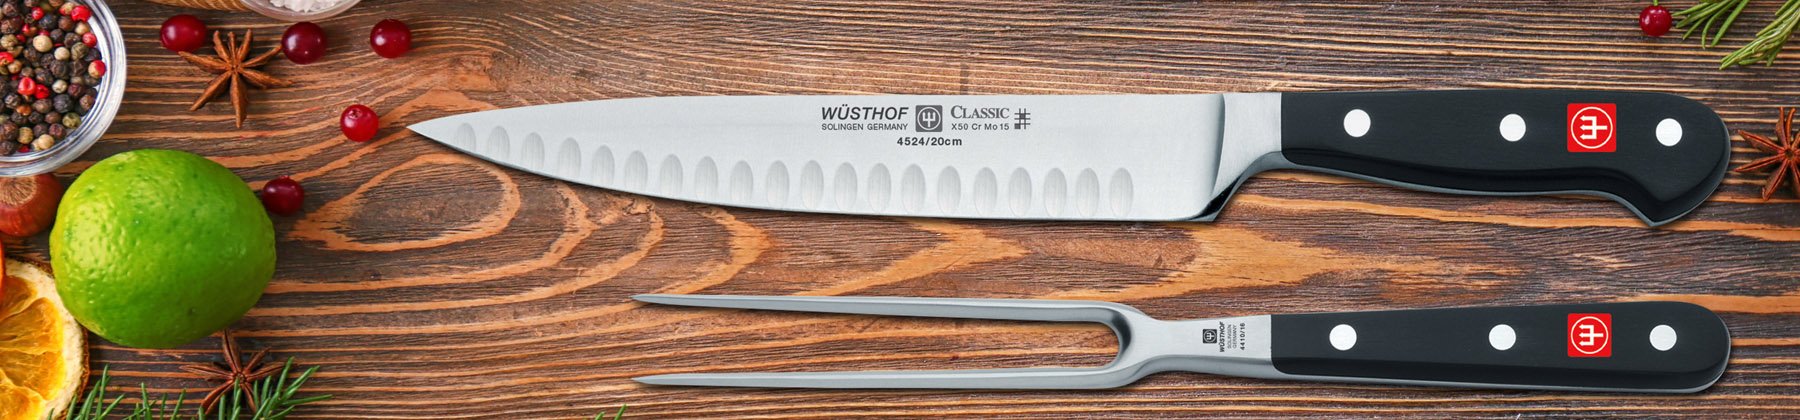 Photo of Wusthof carving knives.